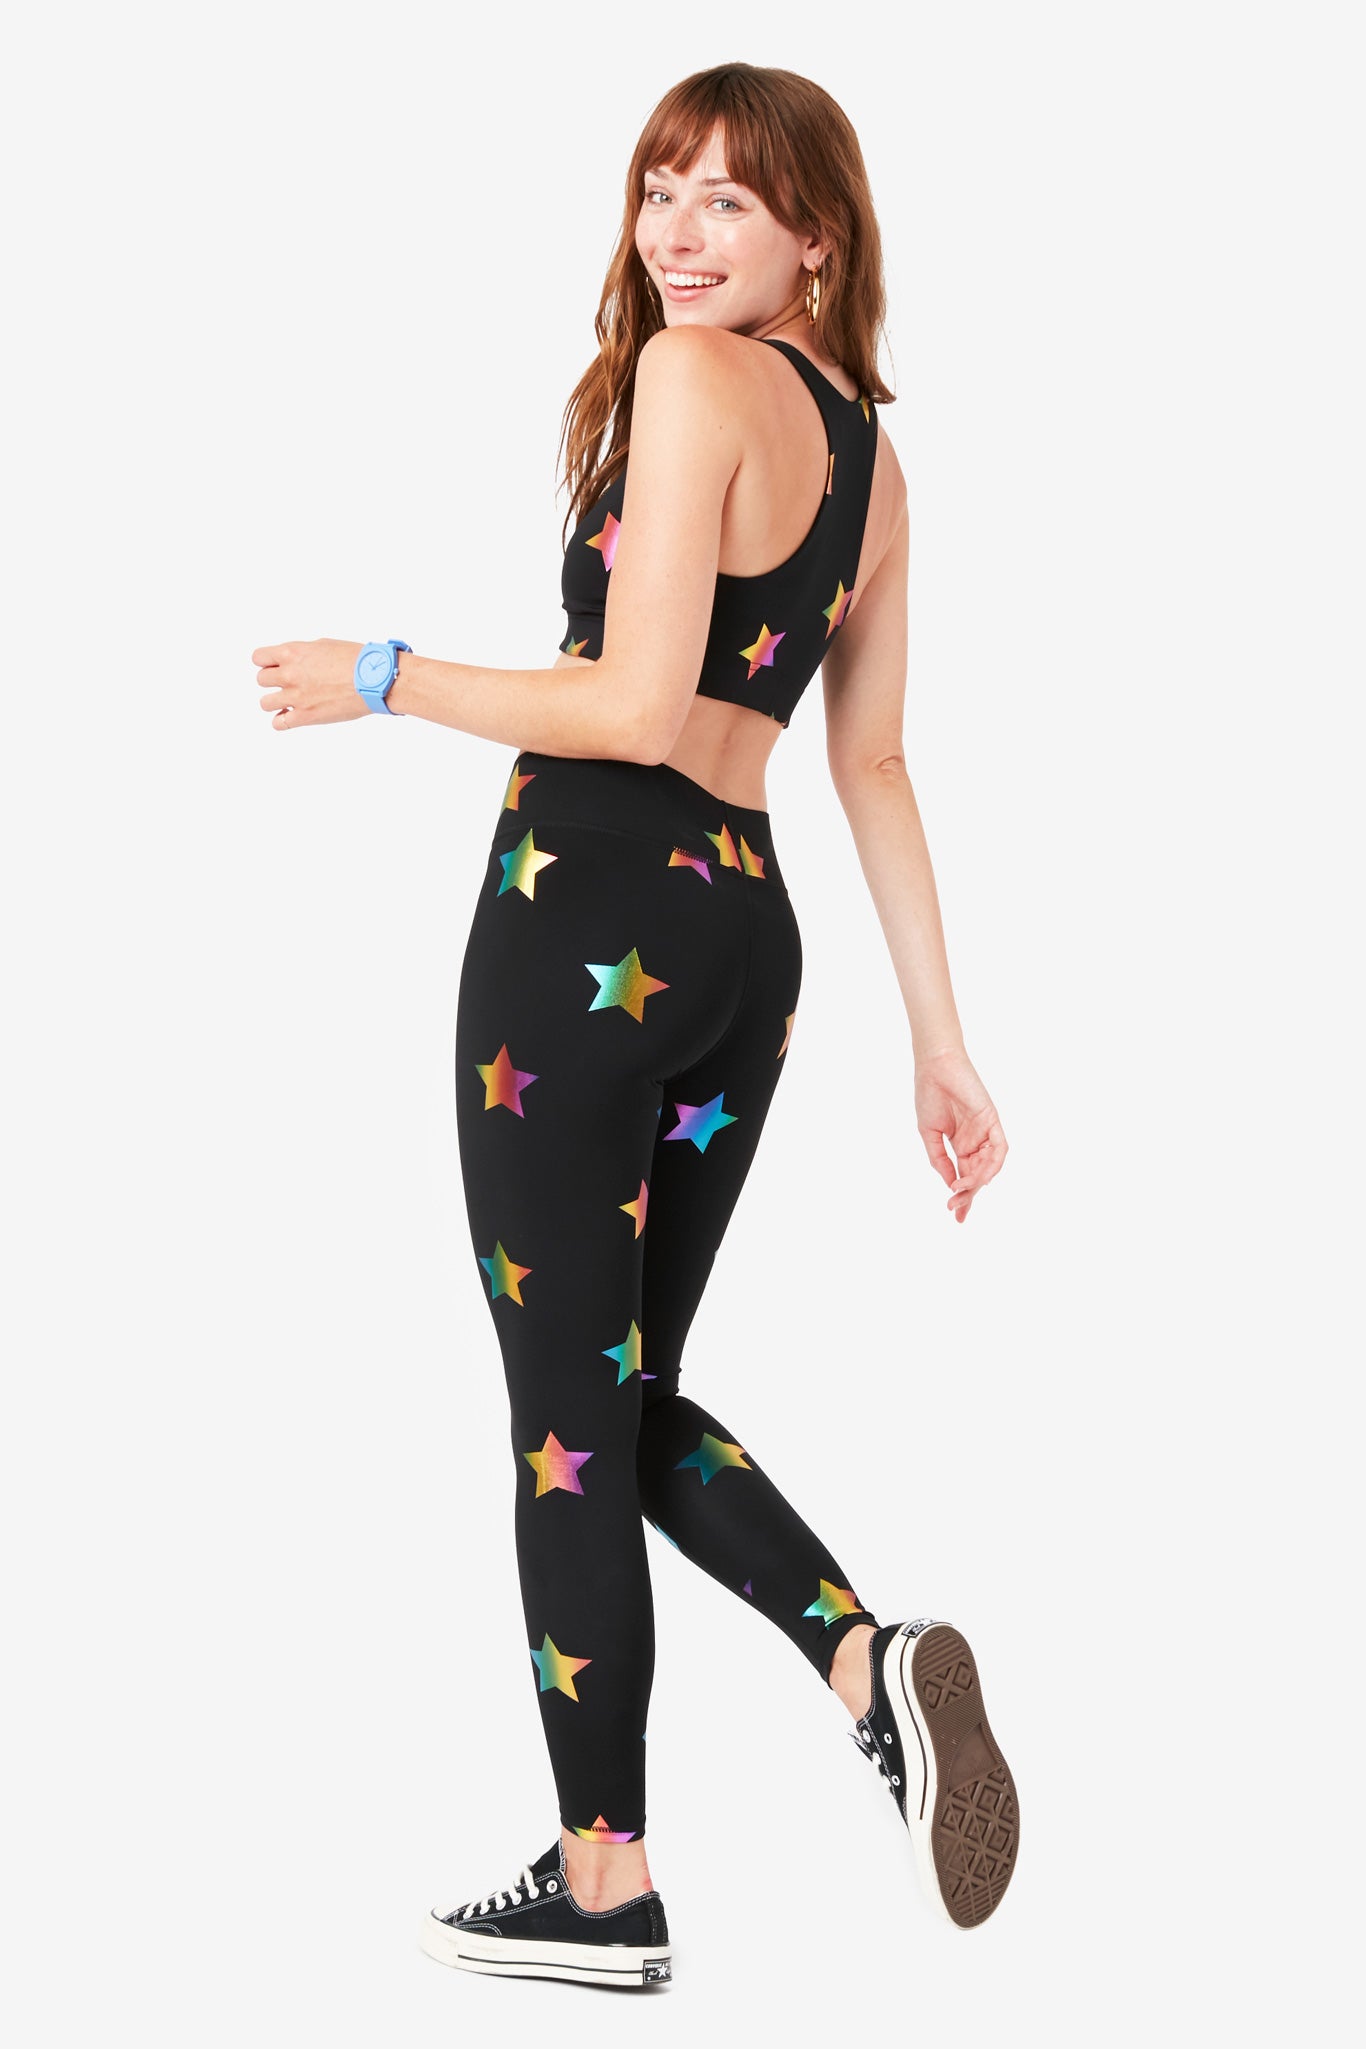 UpLift Leggings in Black Rainbow Star Foil with Tall Band –